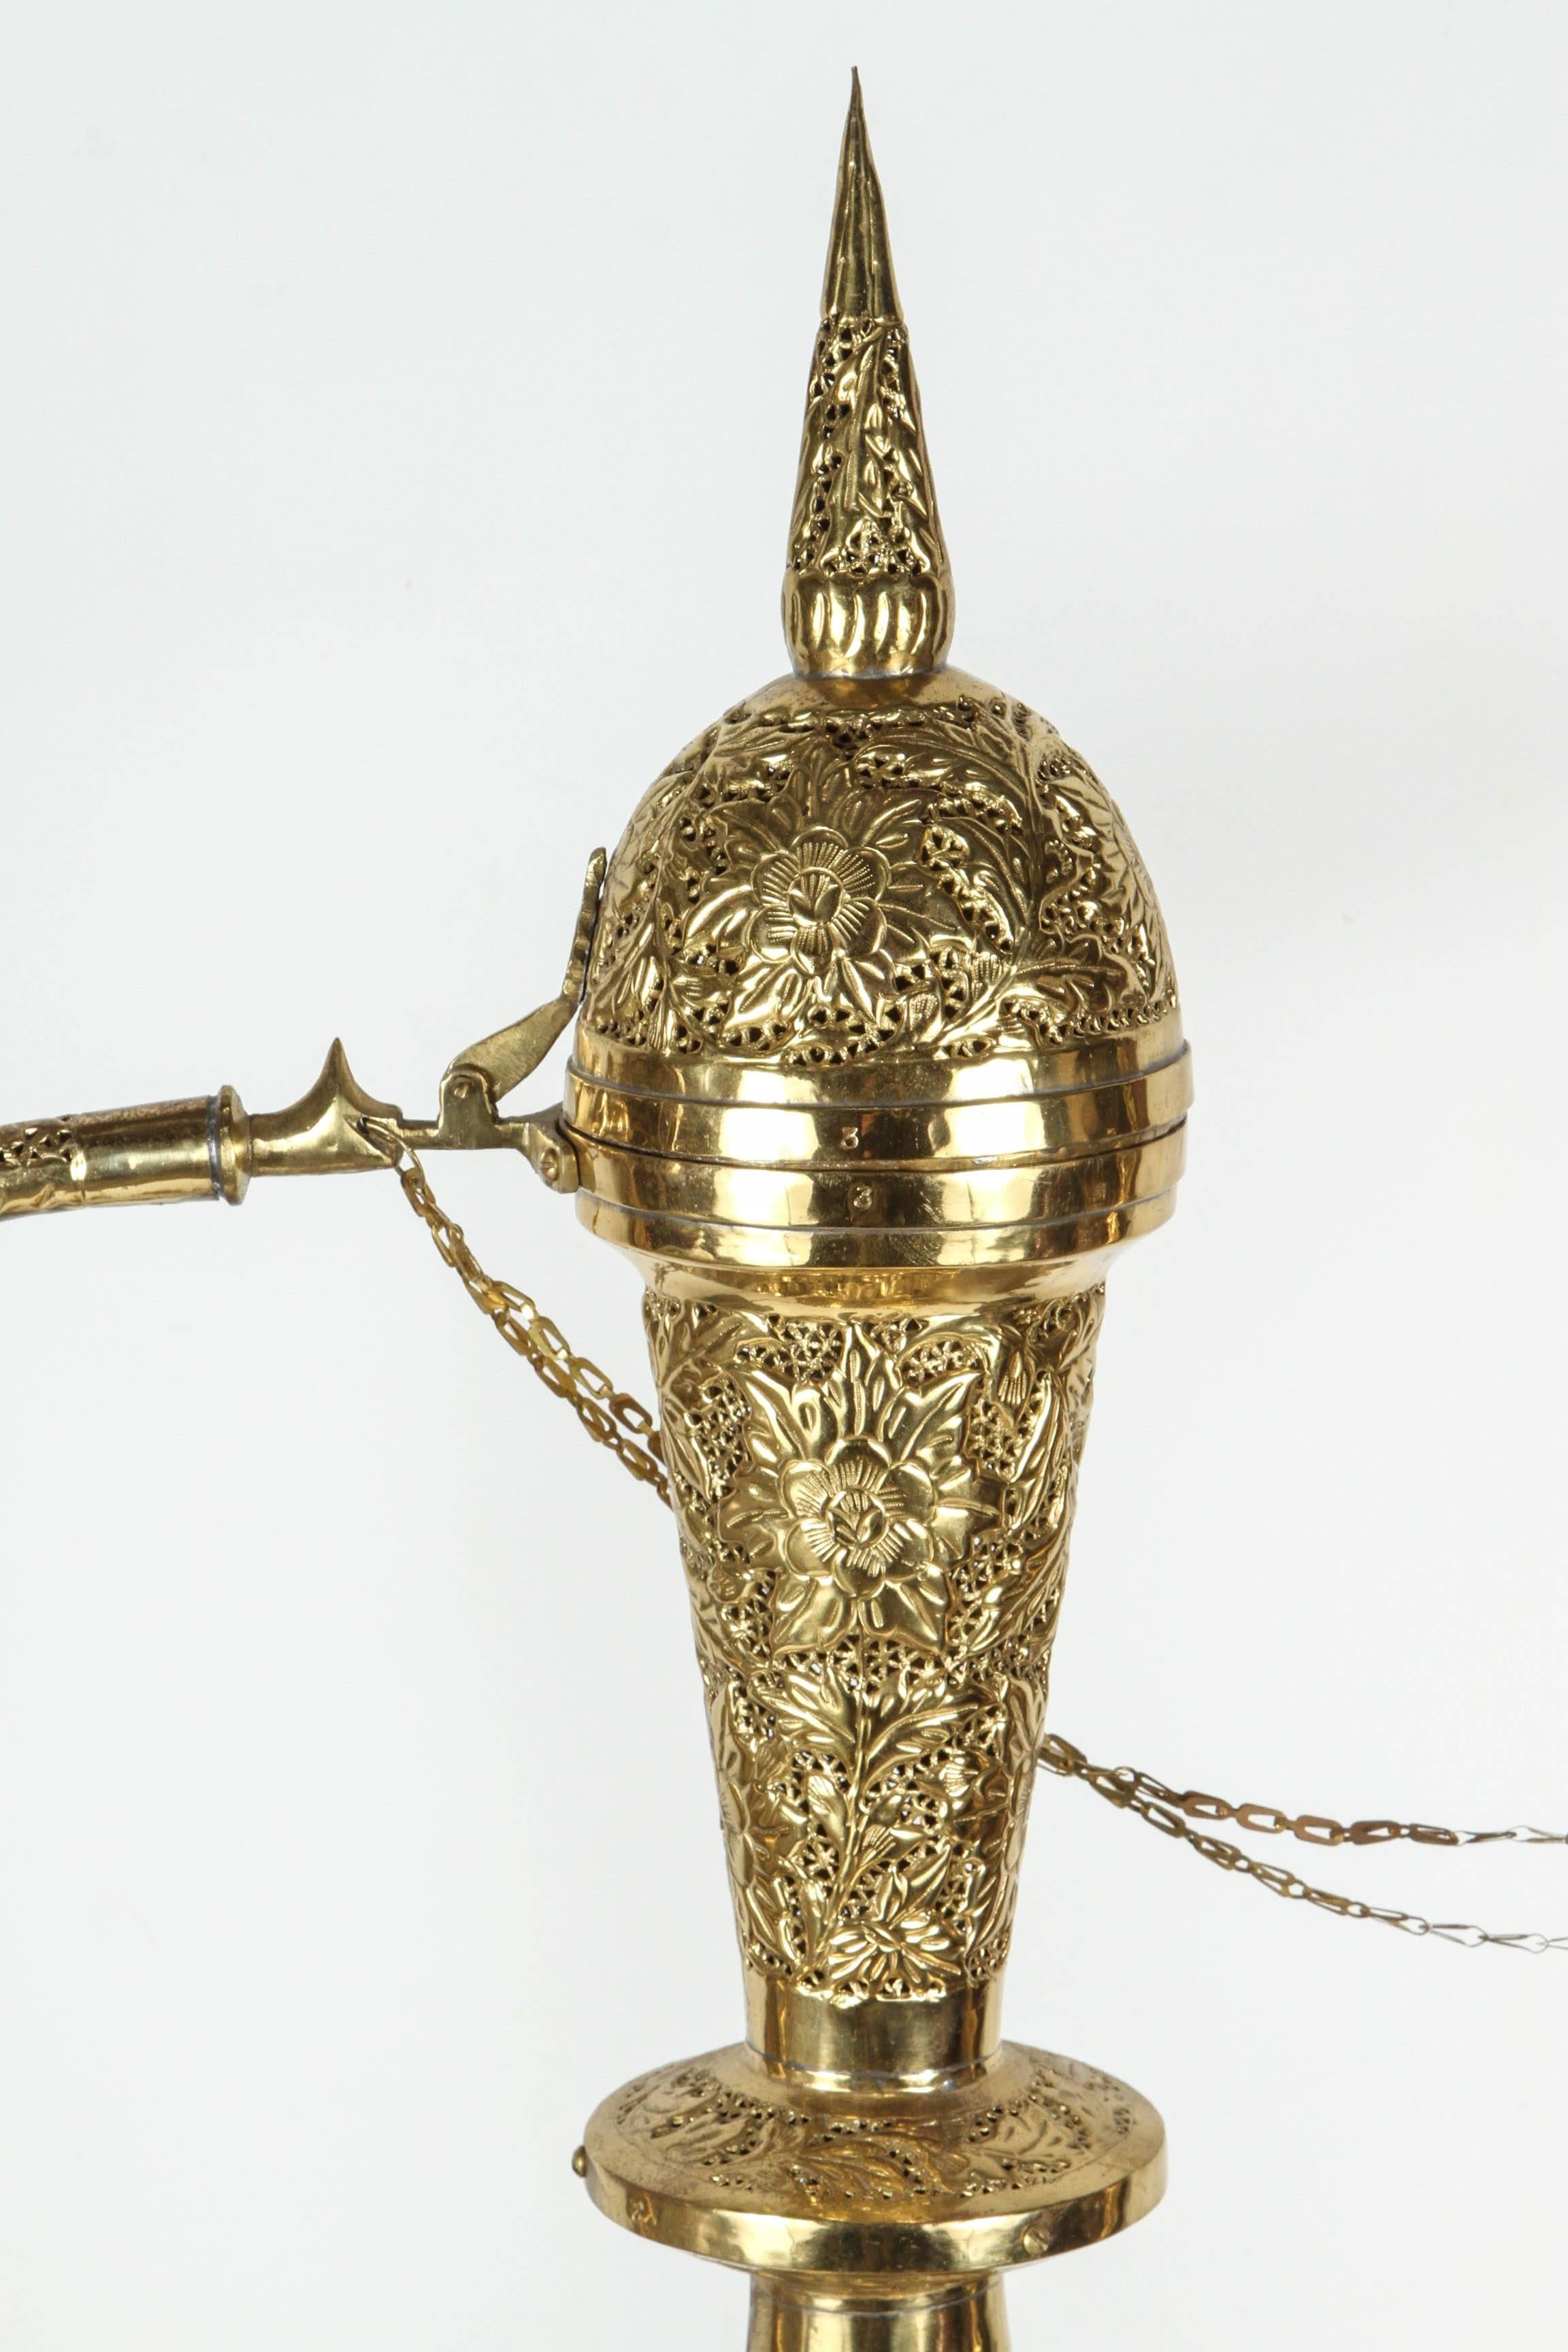 Oversized 4 feet tall Middle Eastern Turkish brass decorative ewer turned into a lamp.
Very decorative handcrafted polished brass Arabian style Turkish table lamp or floor lamp.
Hand-hammered and pierced brass with floral intricate Moorish islamic